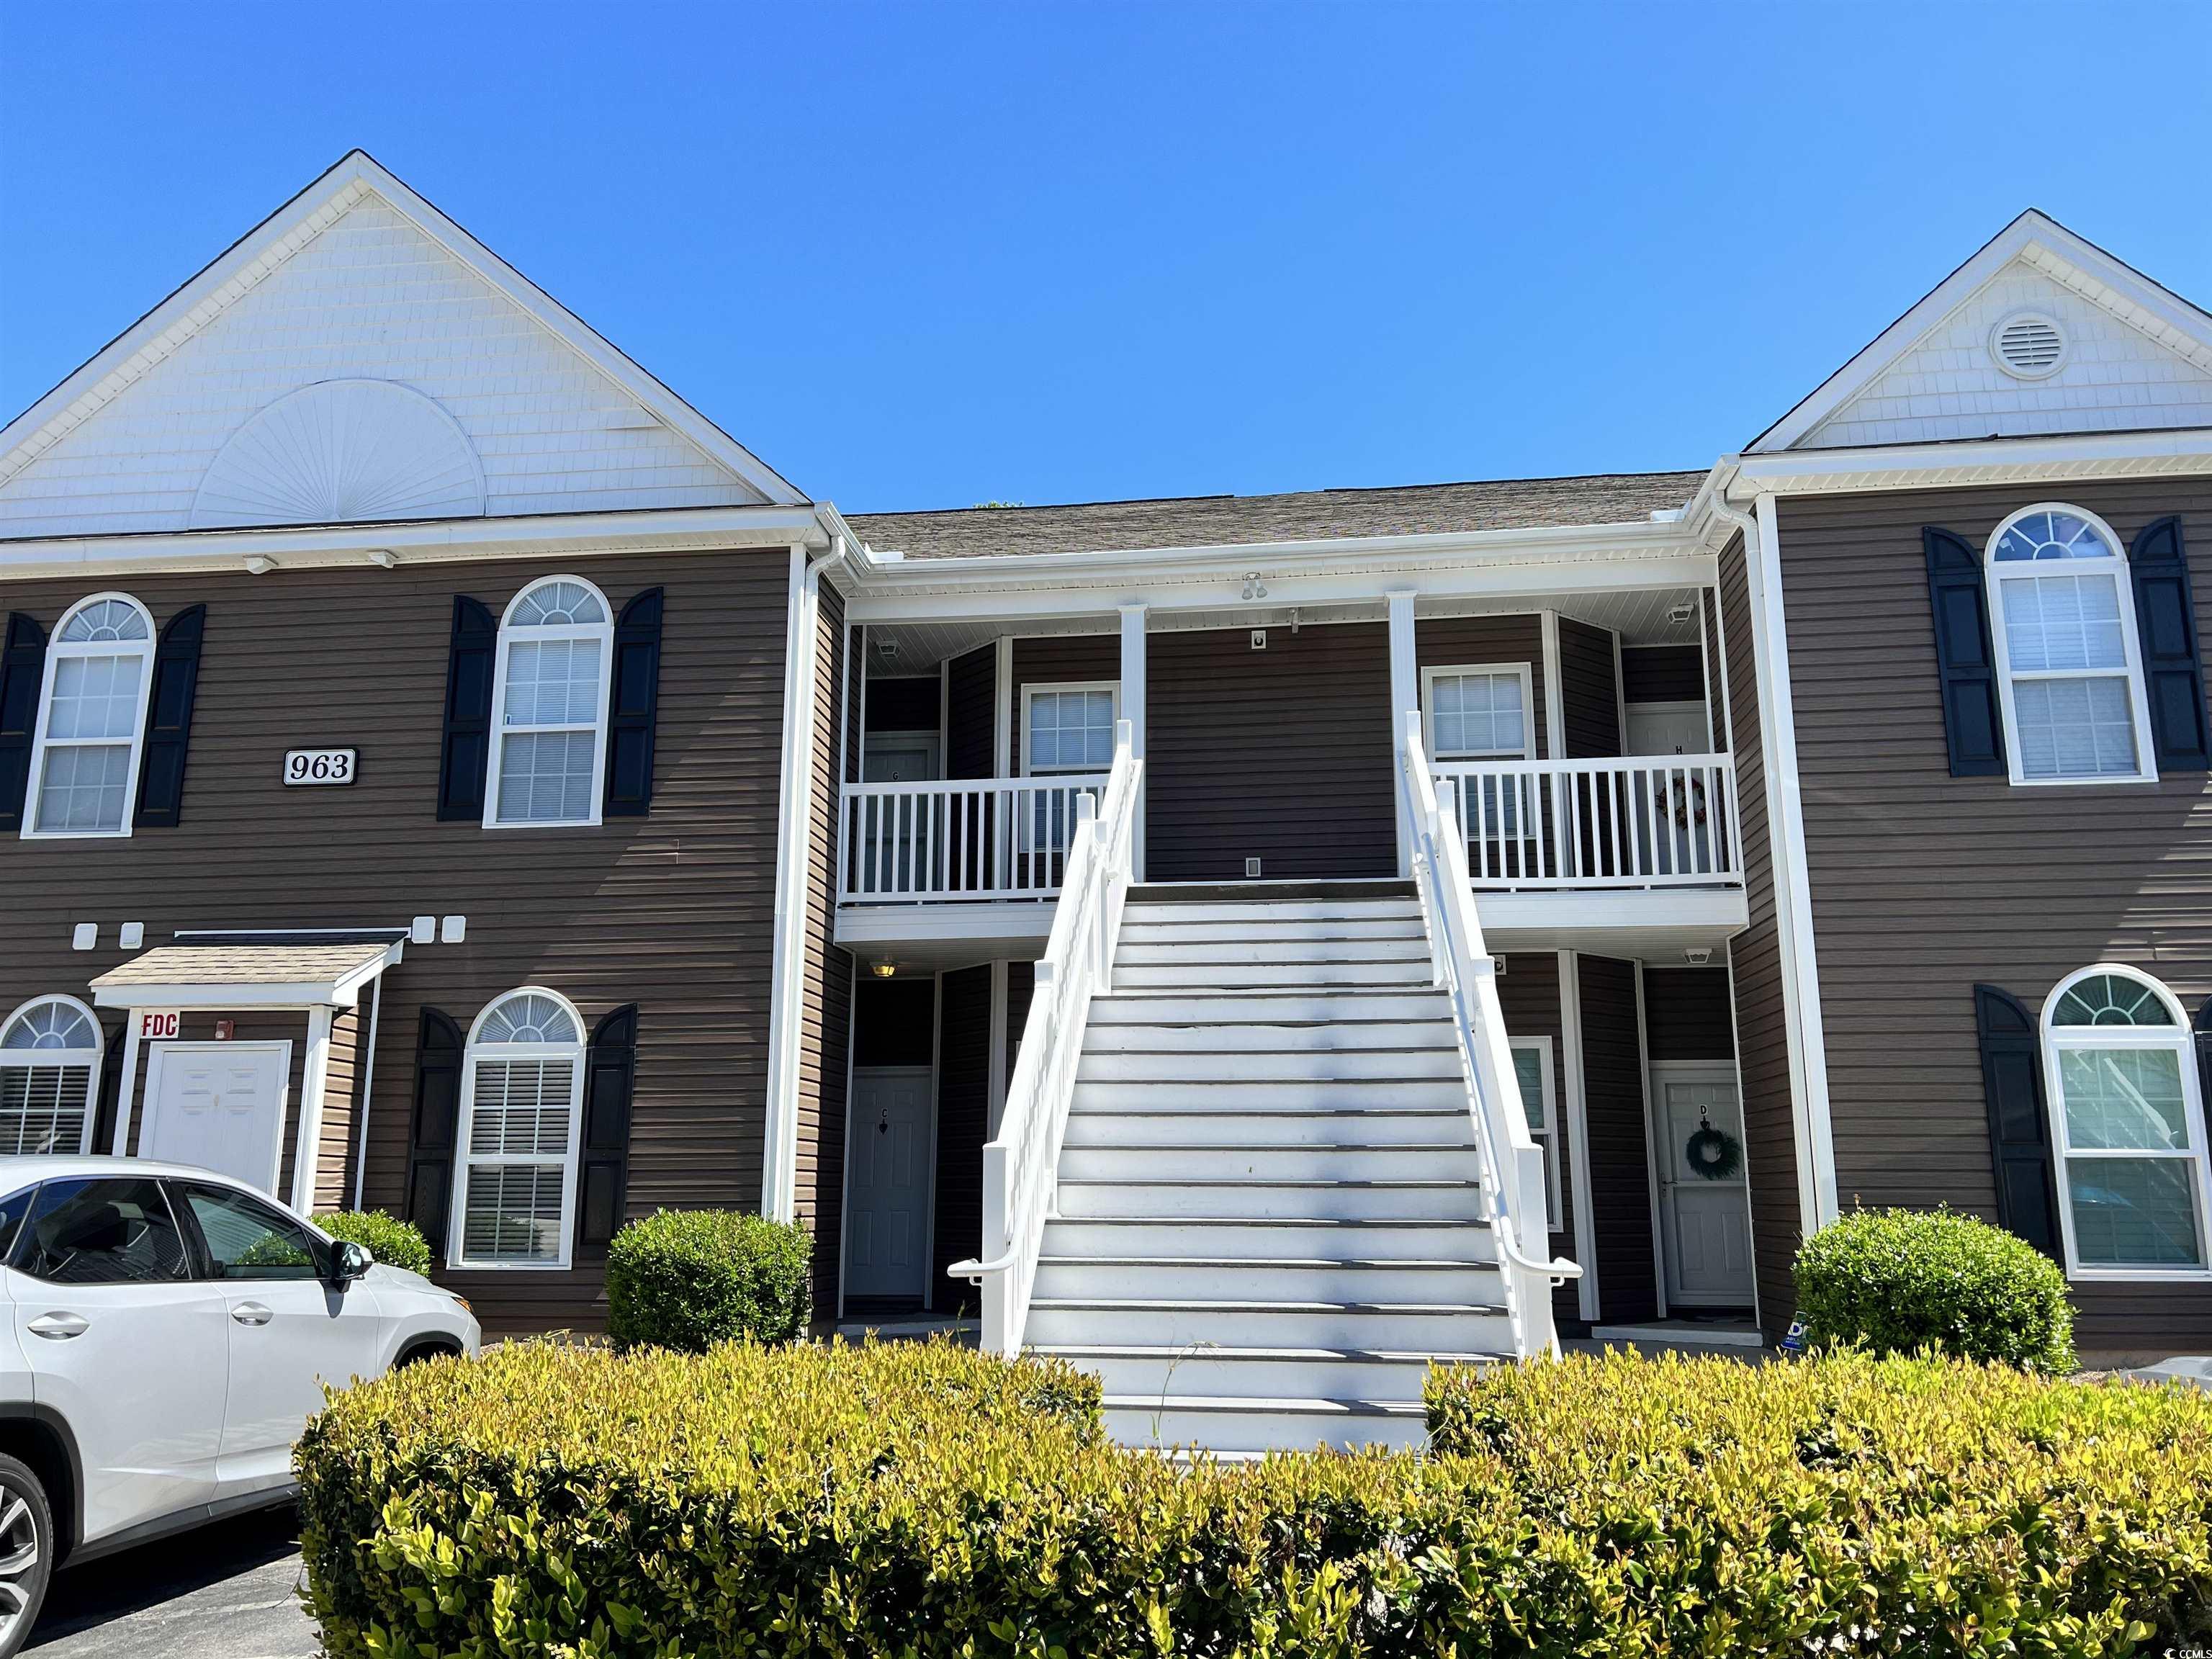 beautifully updated 3 bedroom 2 bath first floor condo in pawleys pavilion.  open living area with screened in porch.  granite counters, easy to care for vinyl plank flooring and recently painted neutral walls. gated community with a pool.  washer/dryer hook ups.  no pets.  available in may.